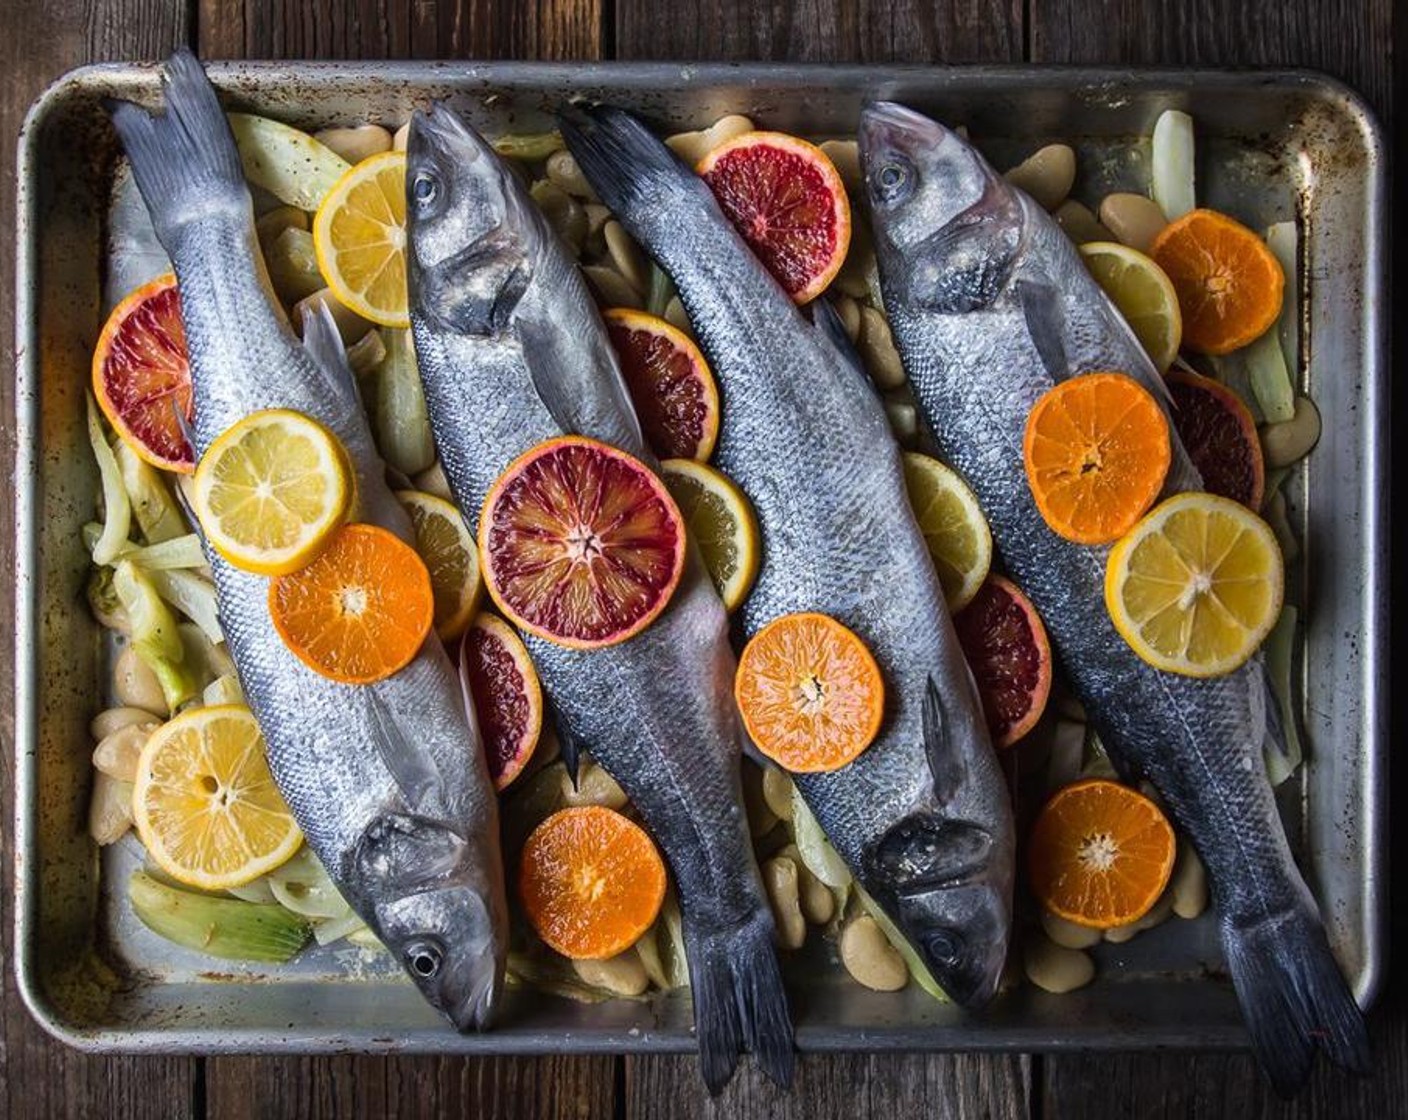 step 5 Lay each prepared fish atop the fennel and bean mixture on the baking sheet. Stuff each fish with Blood Oranges (to taste) and lay additional slices of citrus atop the fennel and bean mixture.